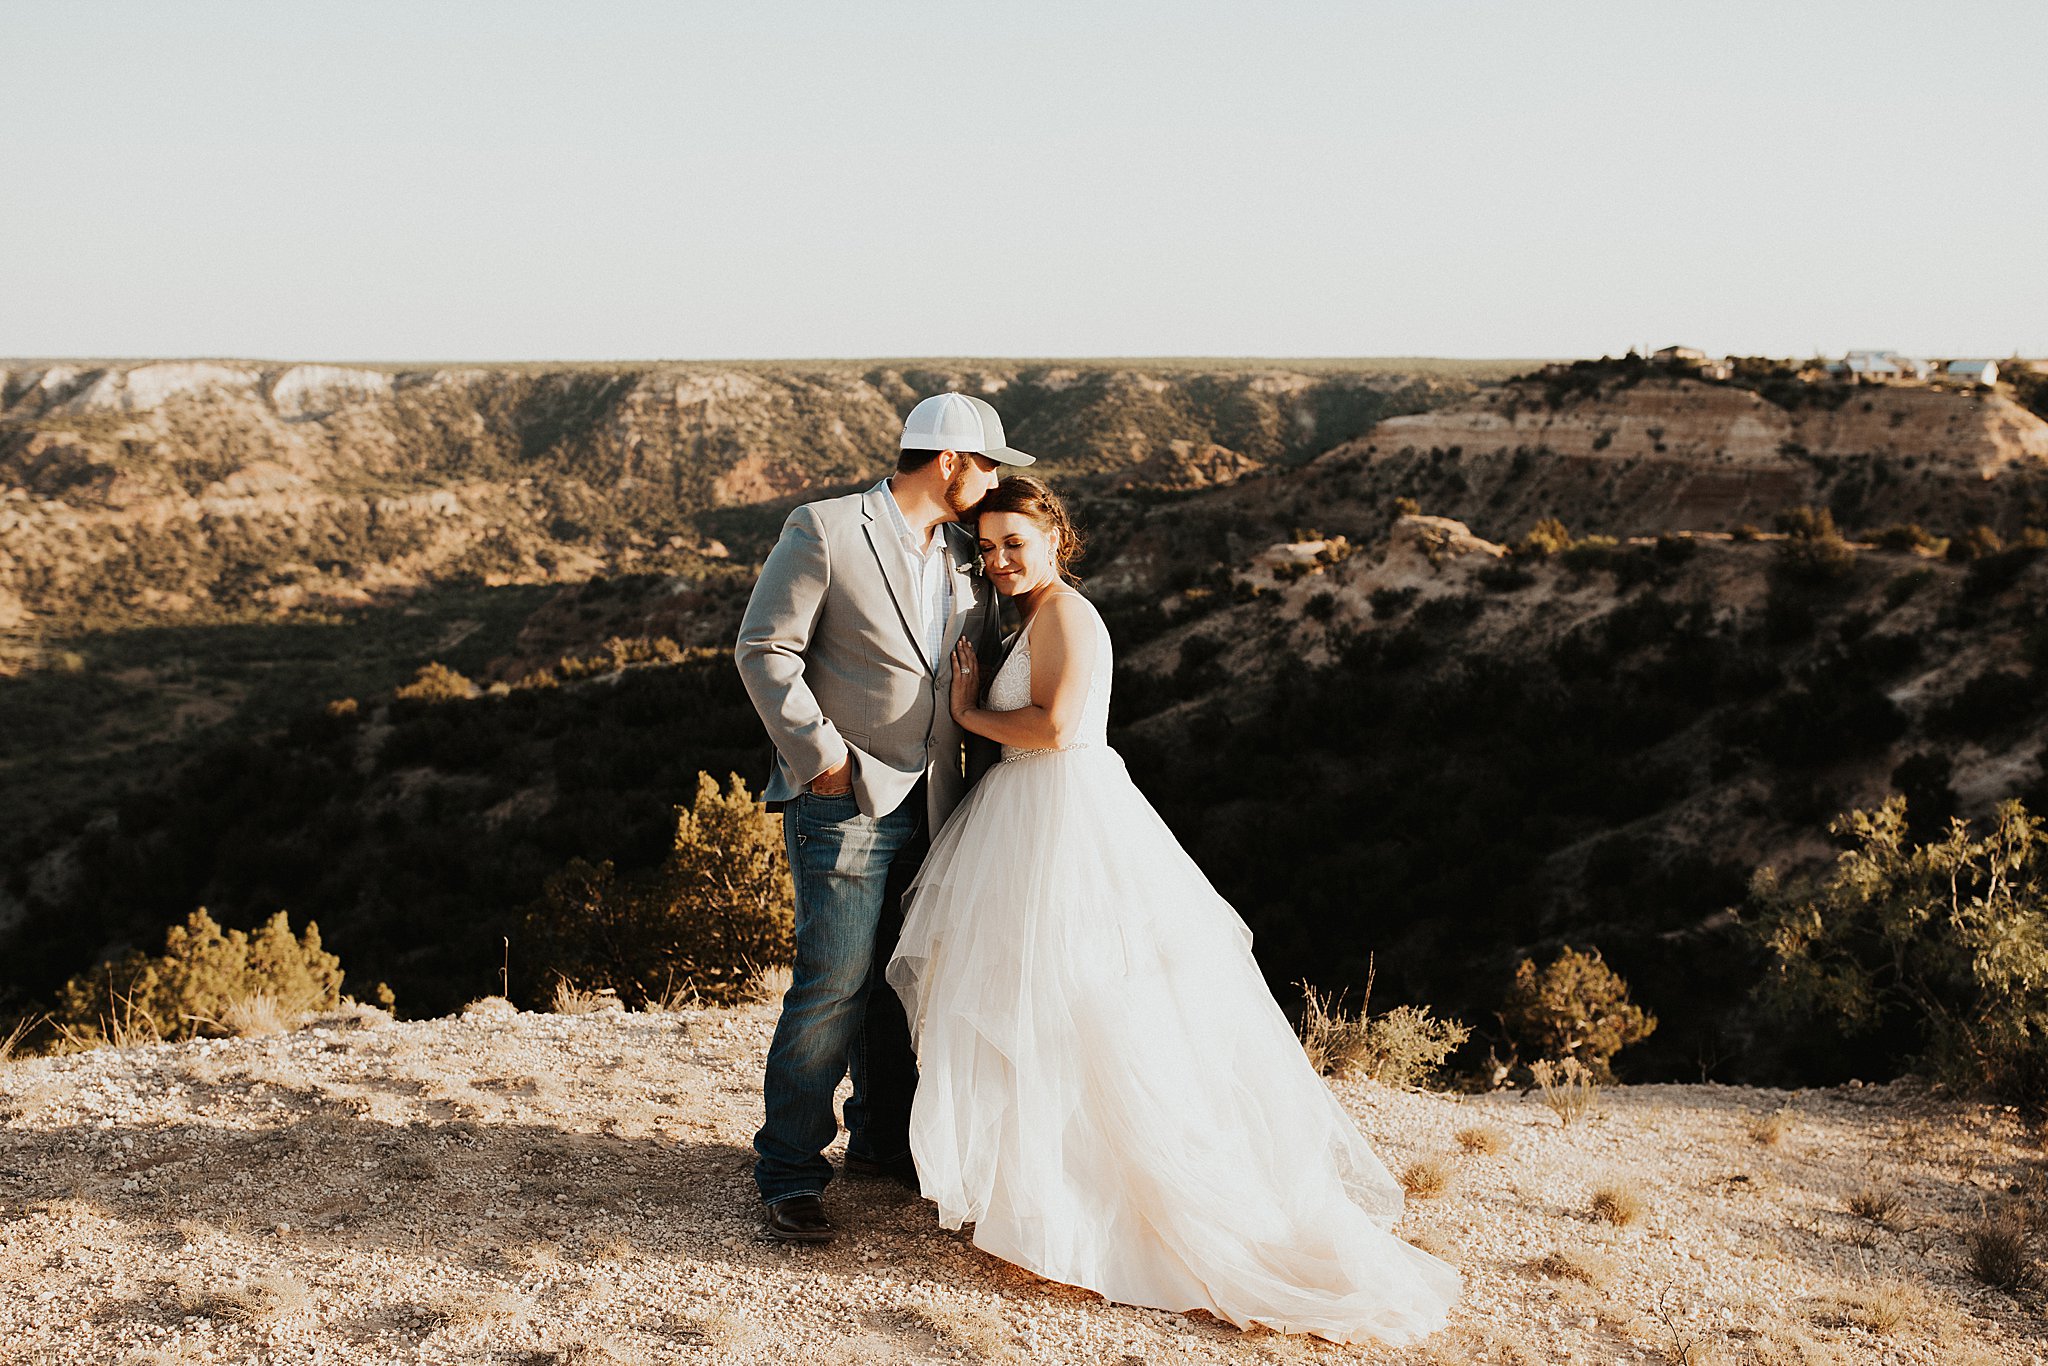 Bride and groom photo at their Palo Duro Canyon wedding. 